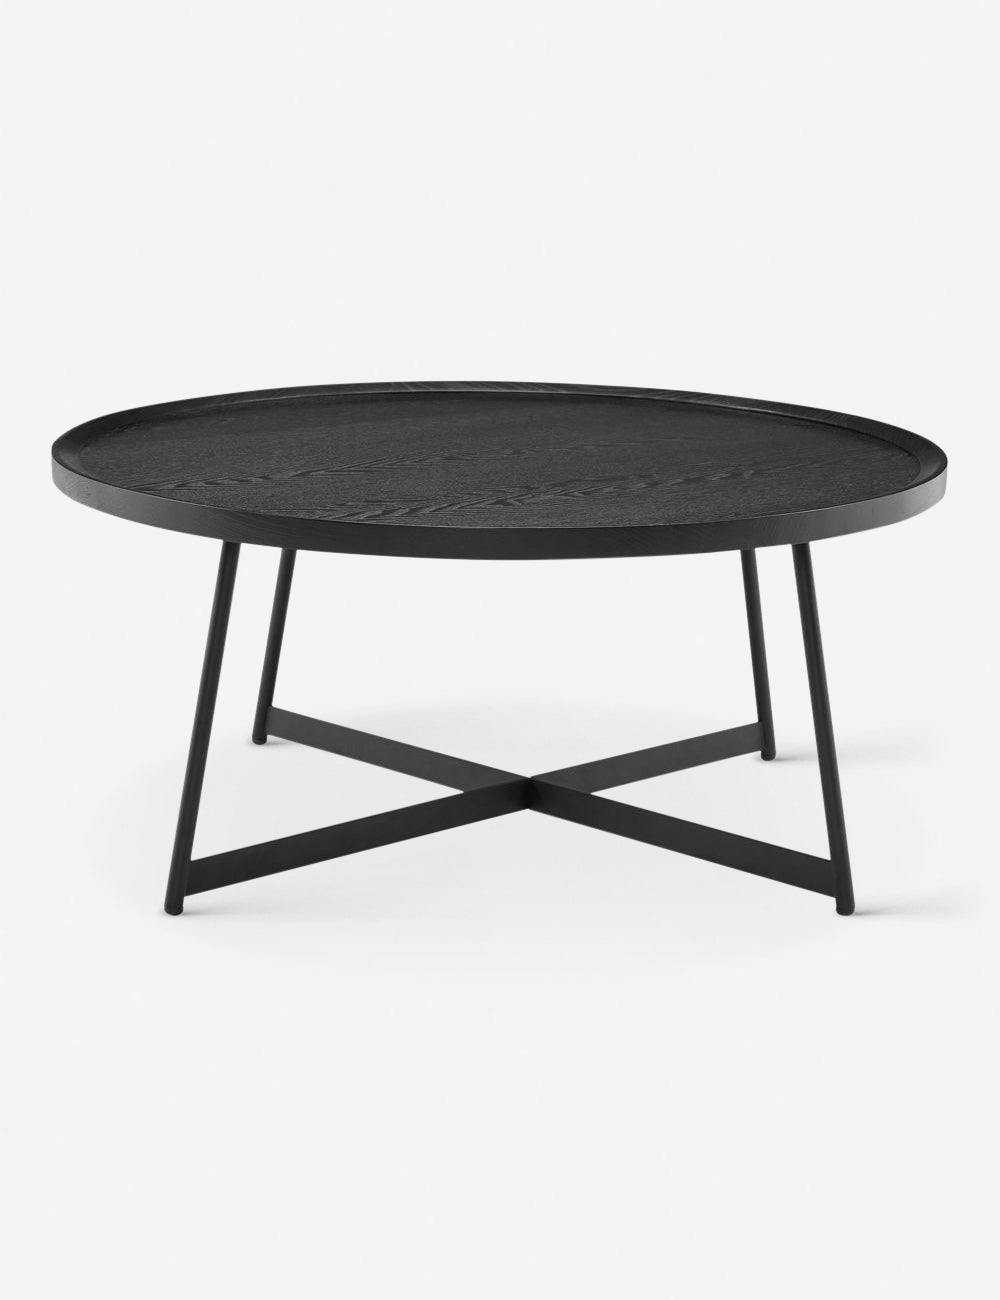 Niklaus 35" Symmetrical Round Coffee Table in Walnut and Black